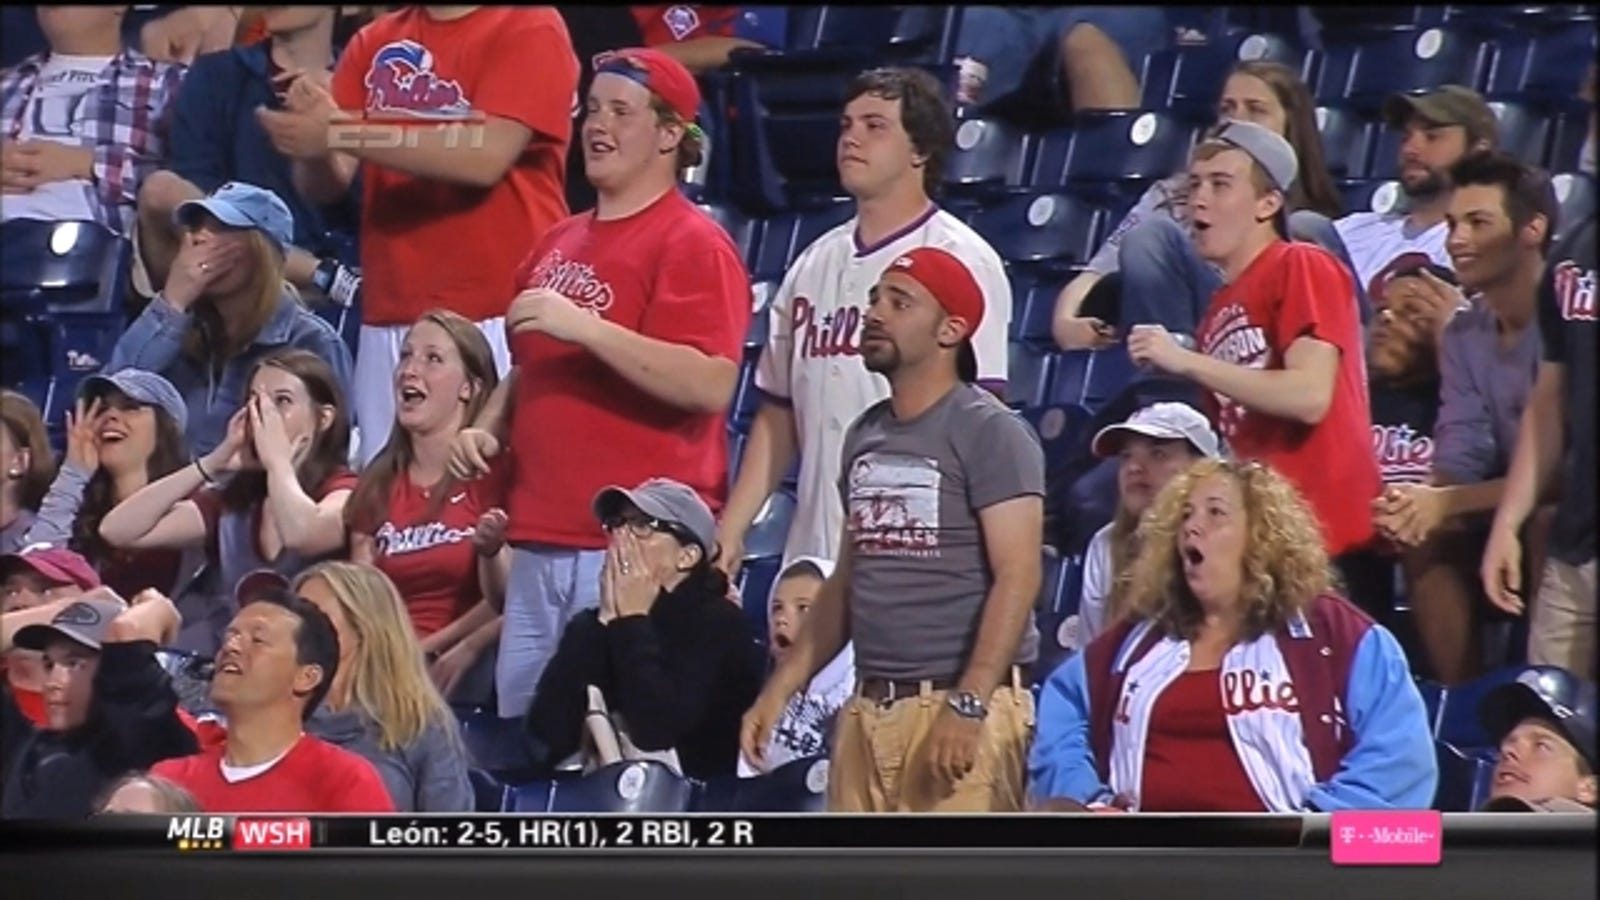 Phillies Fans' Reactions To Dan Uggla's Grand Slam Are Amazing